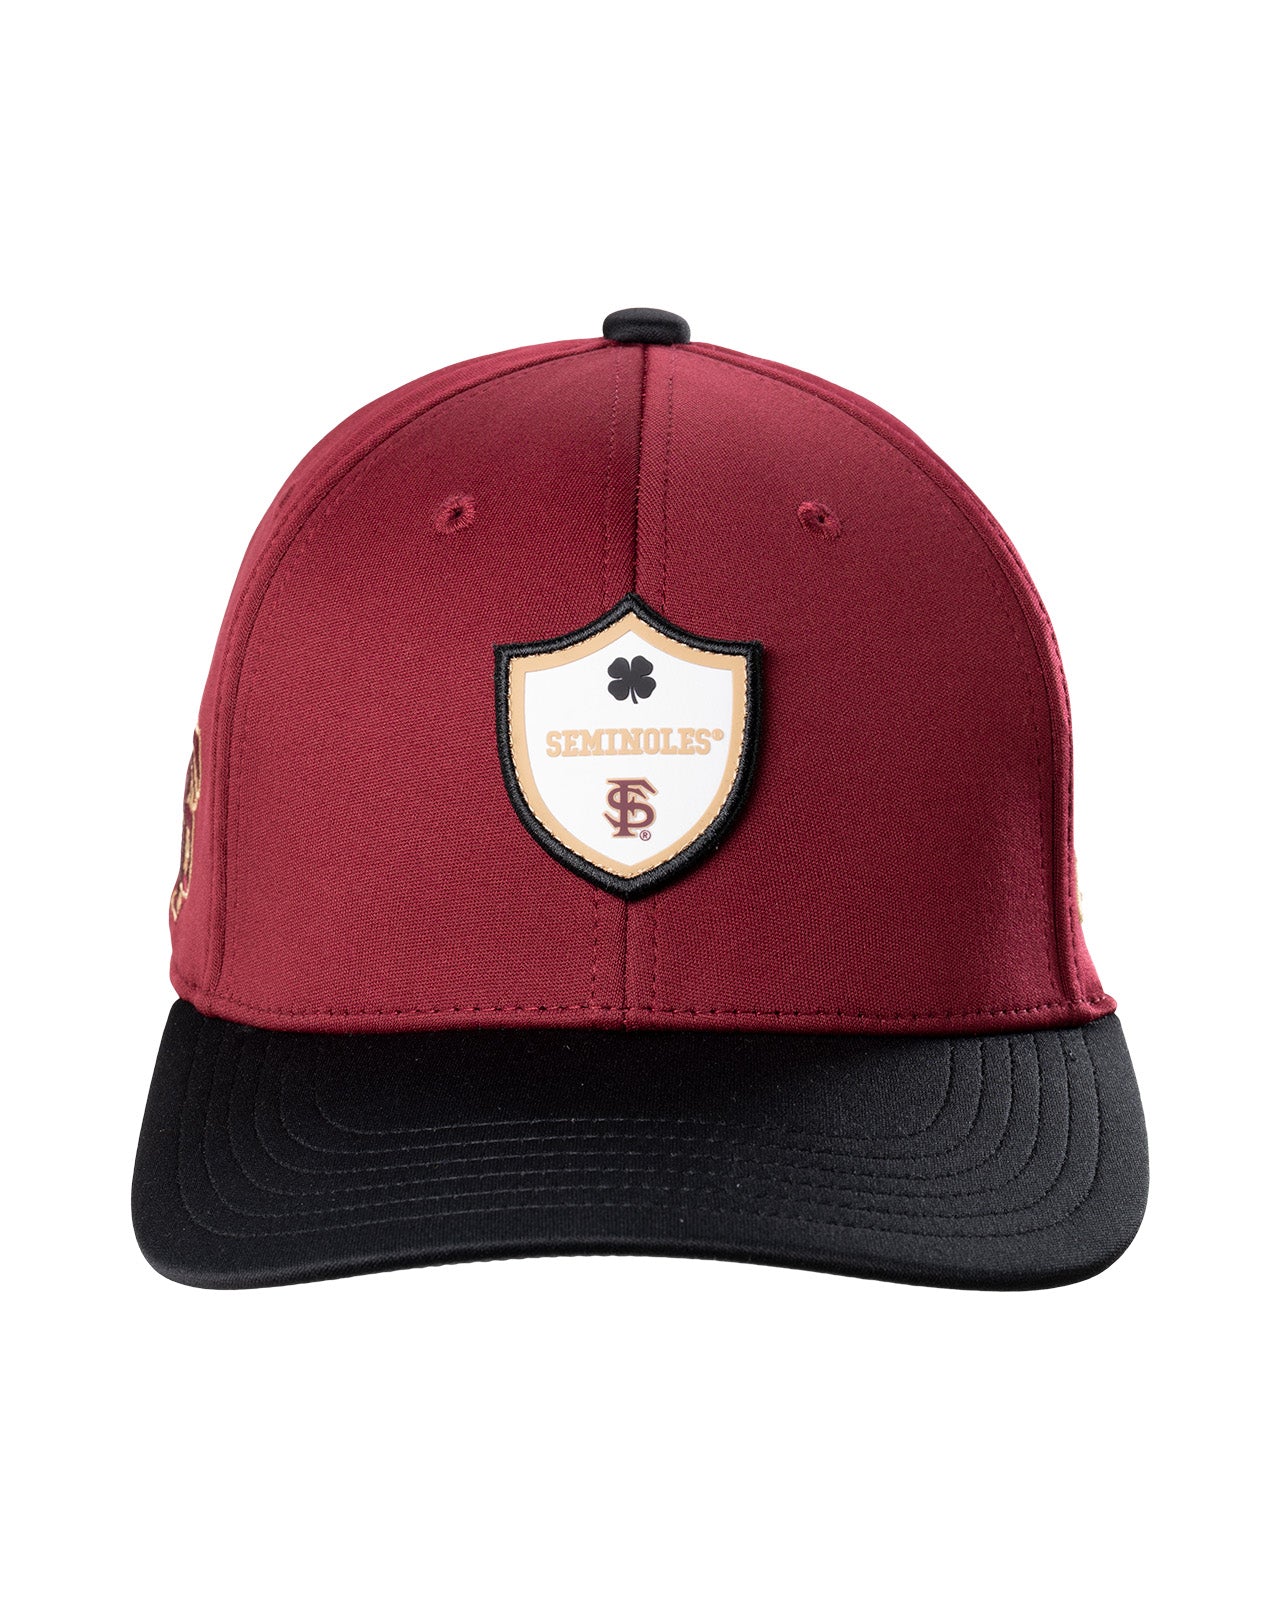 Florida State Phenom, Fitted Hat, Black Clover